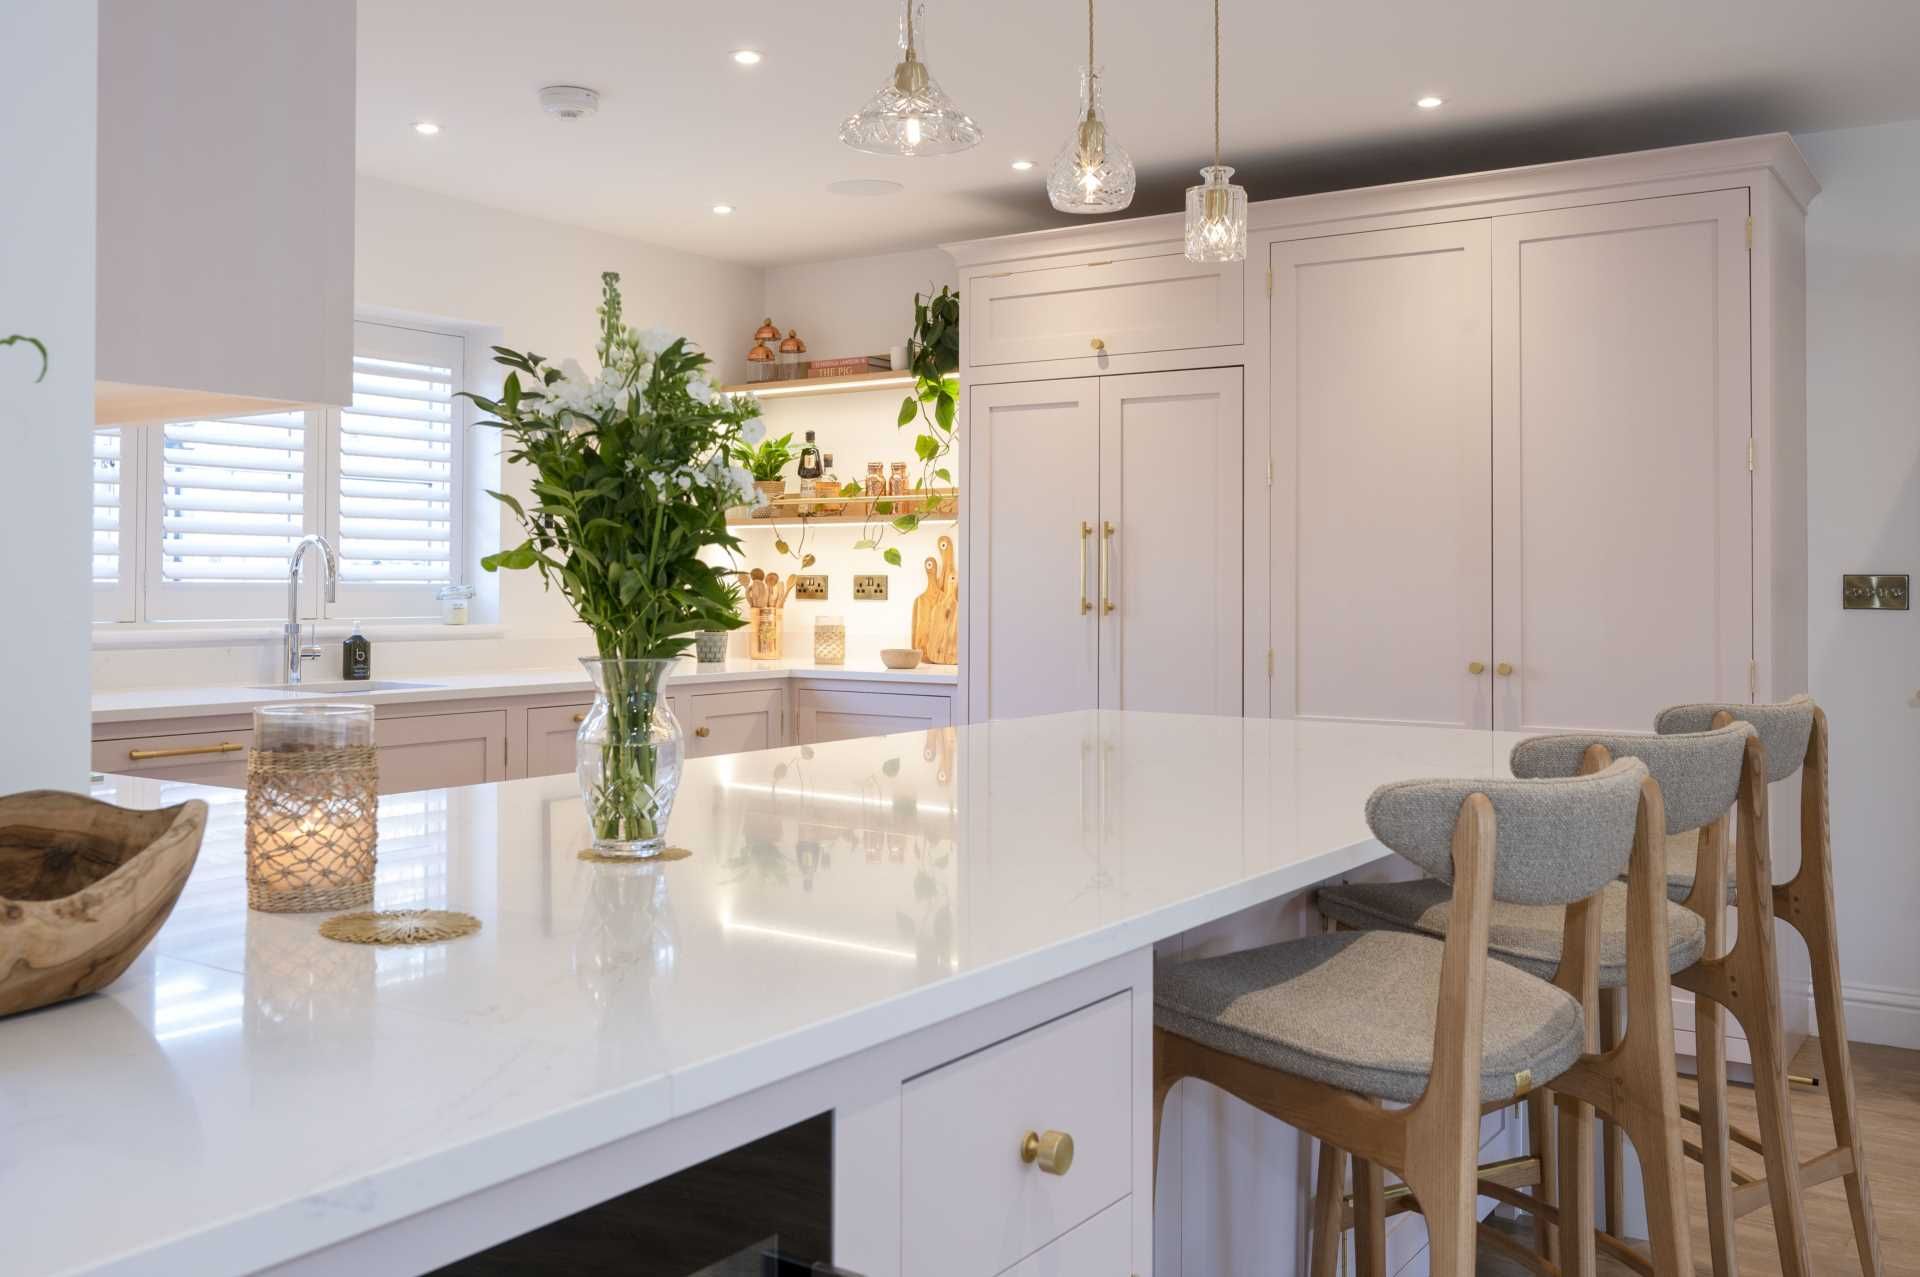 A light and elegant bespoke kitchen with blush pink cabinetry, gold hardware, white countertops, a central island with bar seating, and decorative pendant lights, enhanced by natural light and wooden accents.